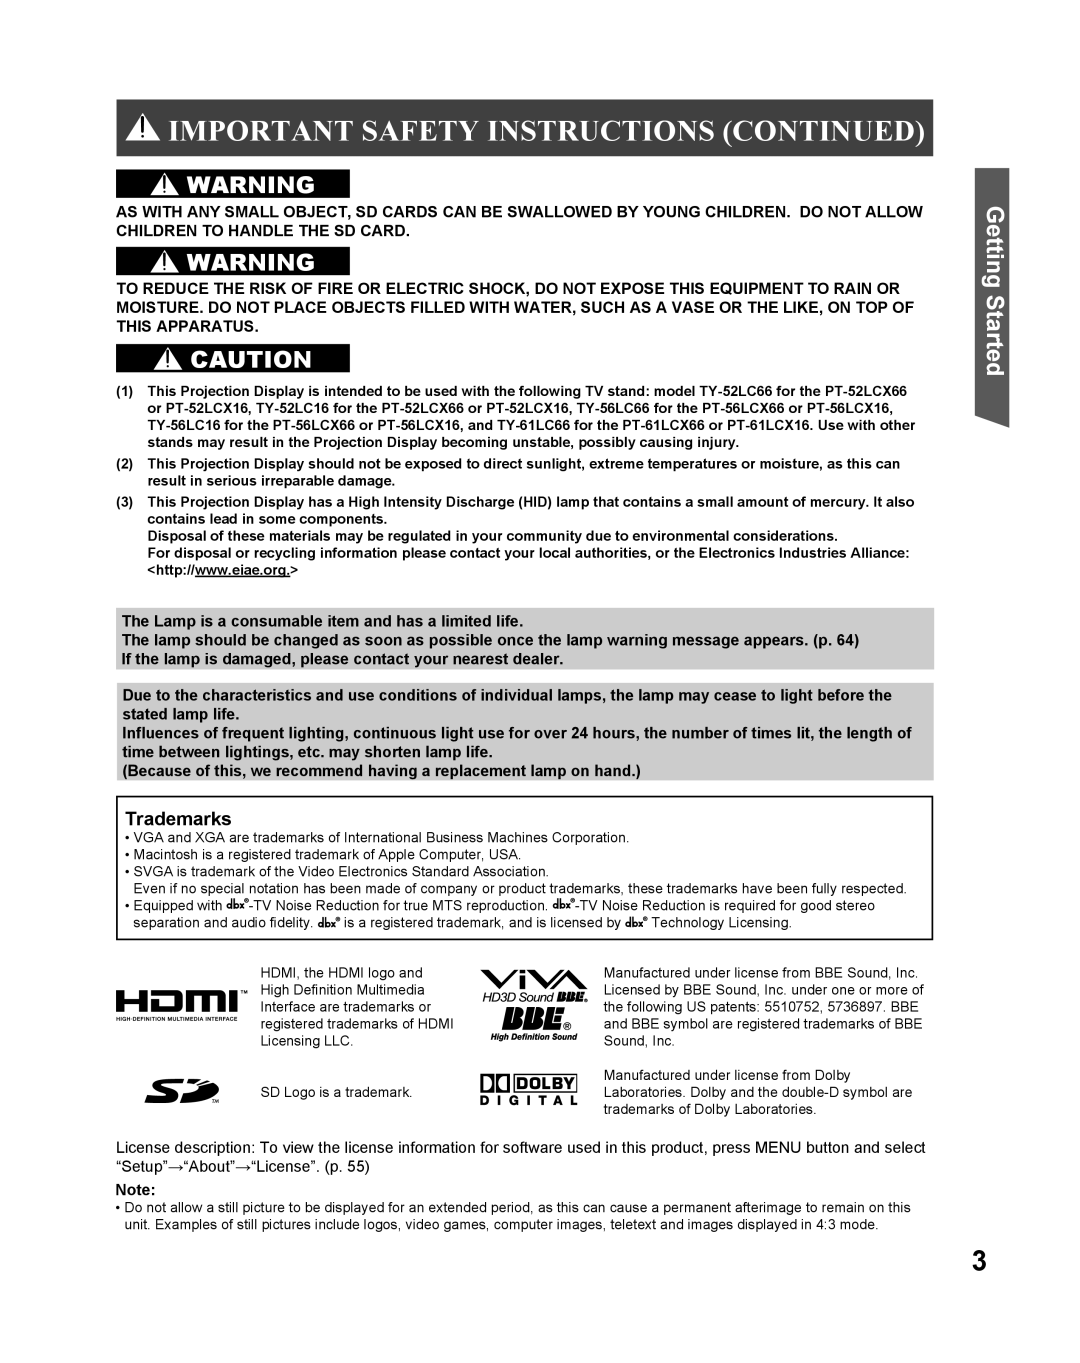 Panasonic PT 56LCX66, PT-61LCX16, PT-52LCX16 manual Important Safety Instructions Continued, Getting Started, Trademarks 